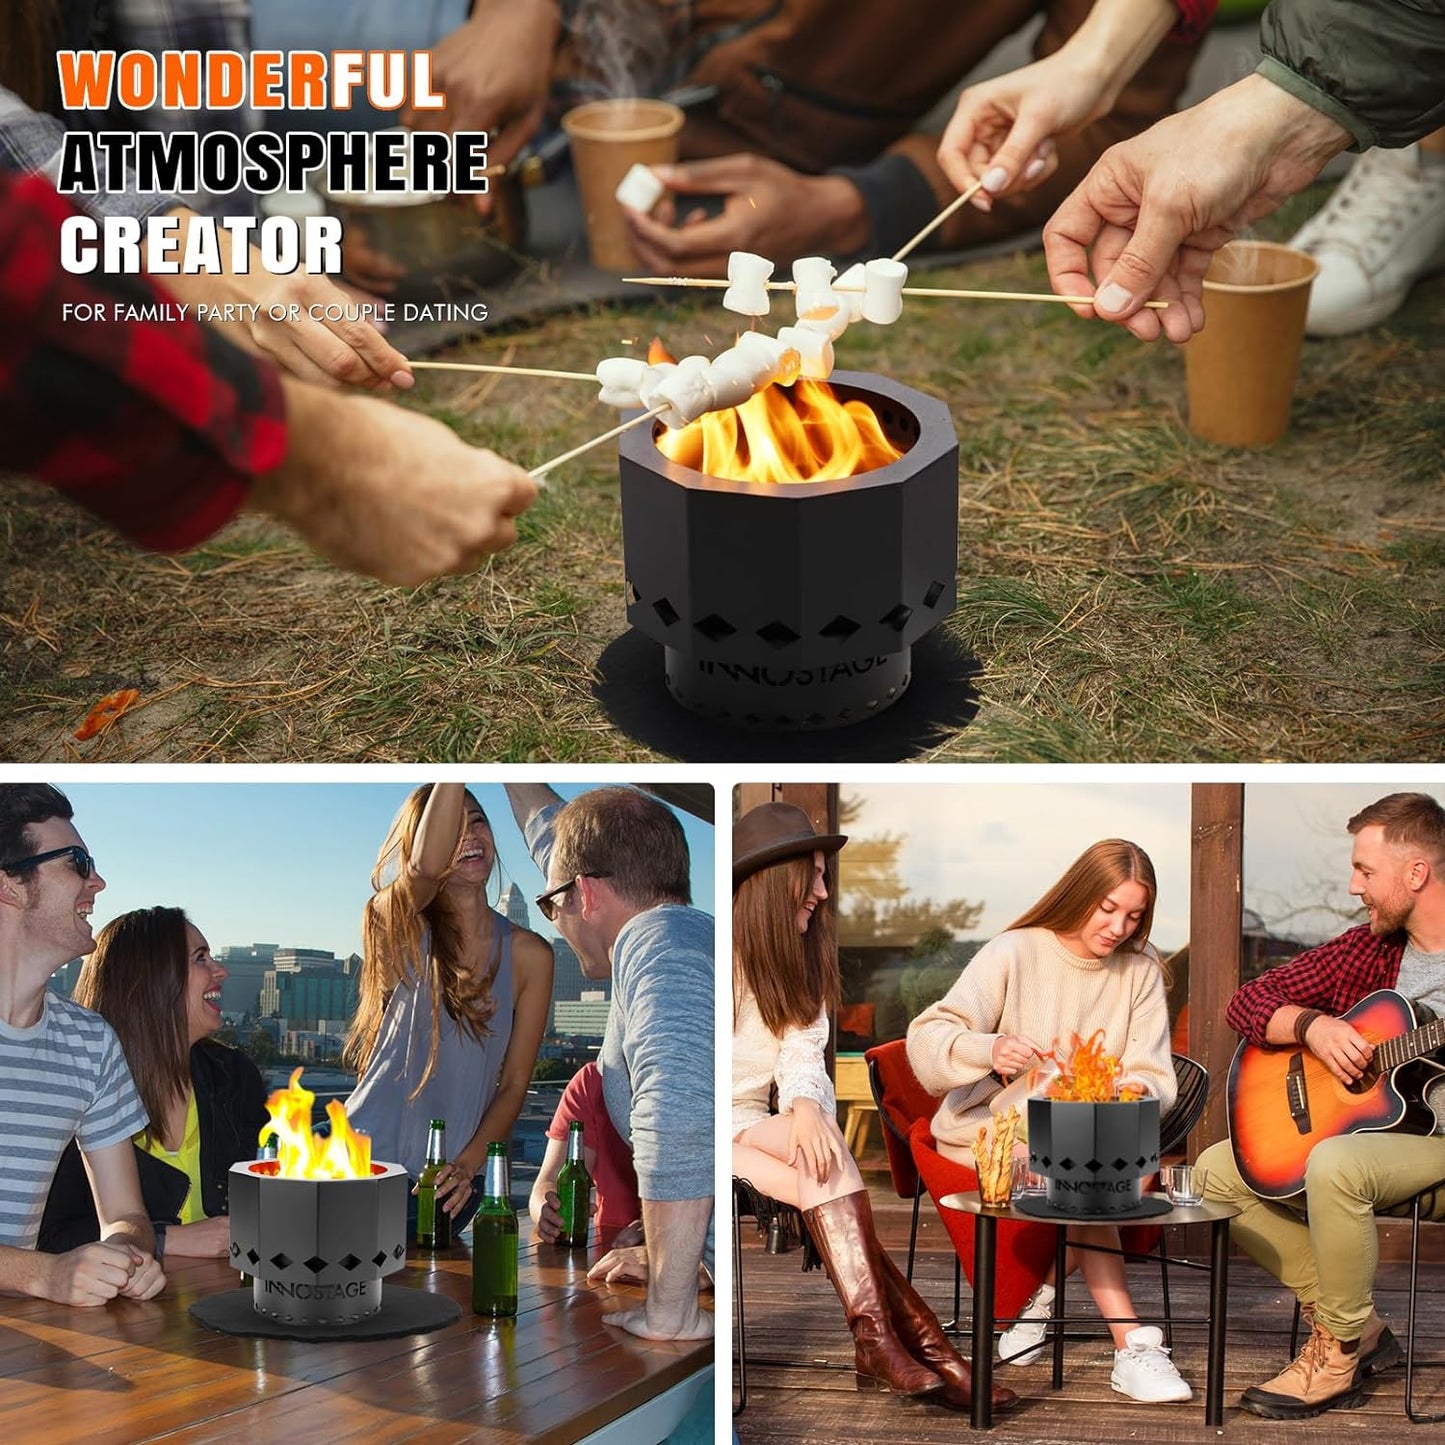 Tabletop Fire Pit - Portable Small Firepit Bowl with Carrying Bag, 8"